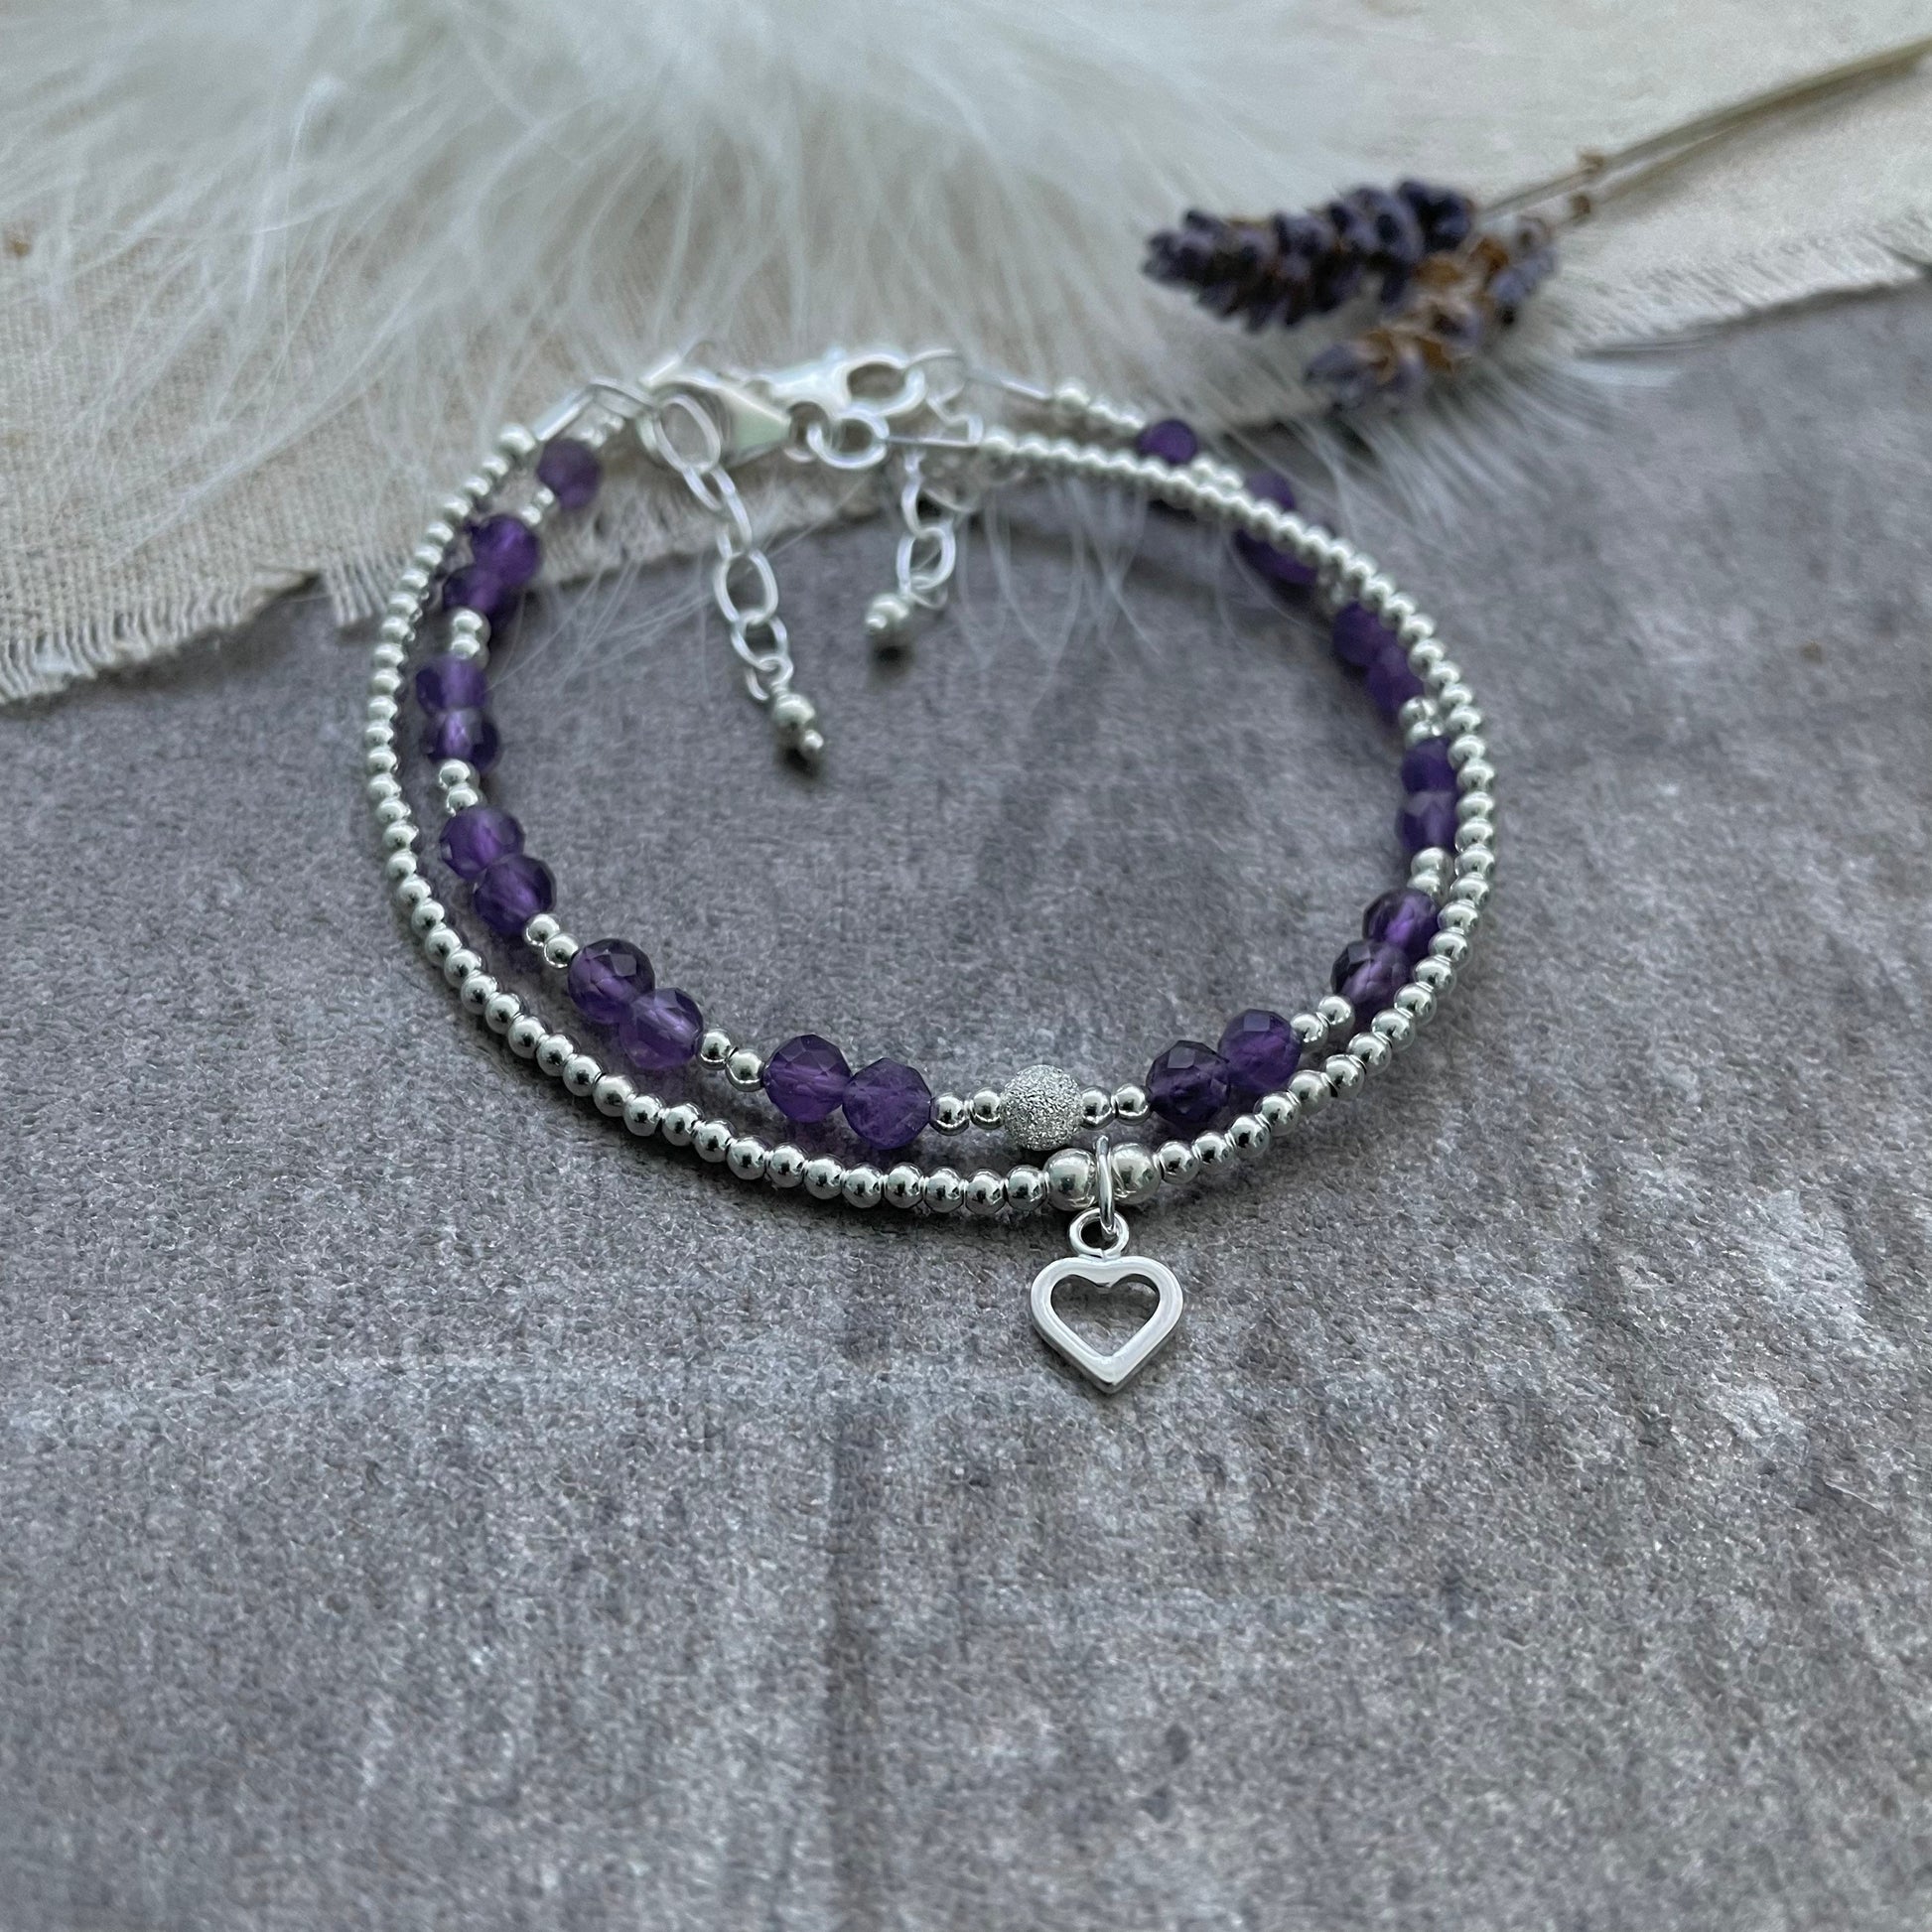 Amethyst Bracelet Set made with February Birthstone and Sterling Silver, February Birthday Gift for Women